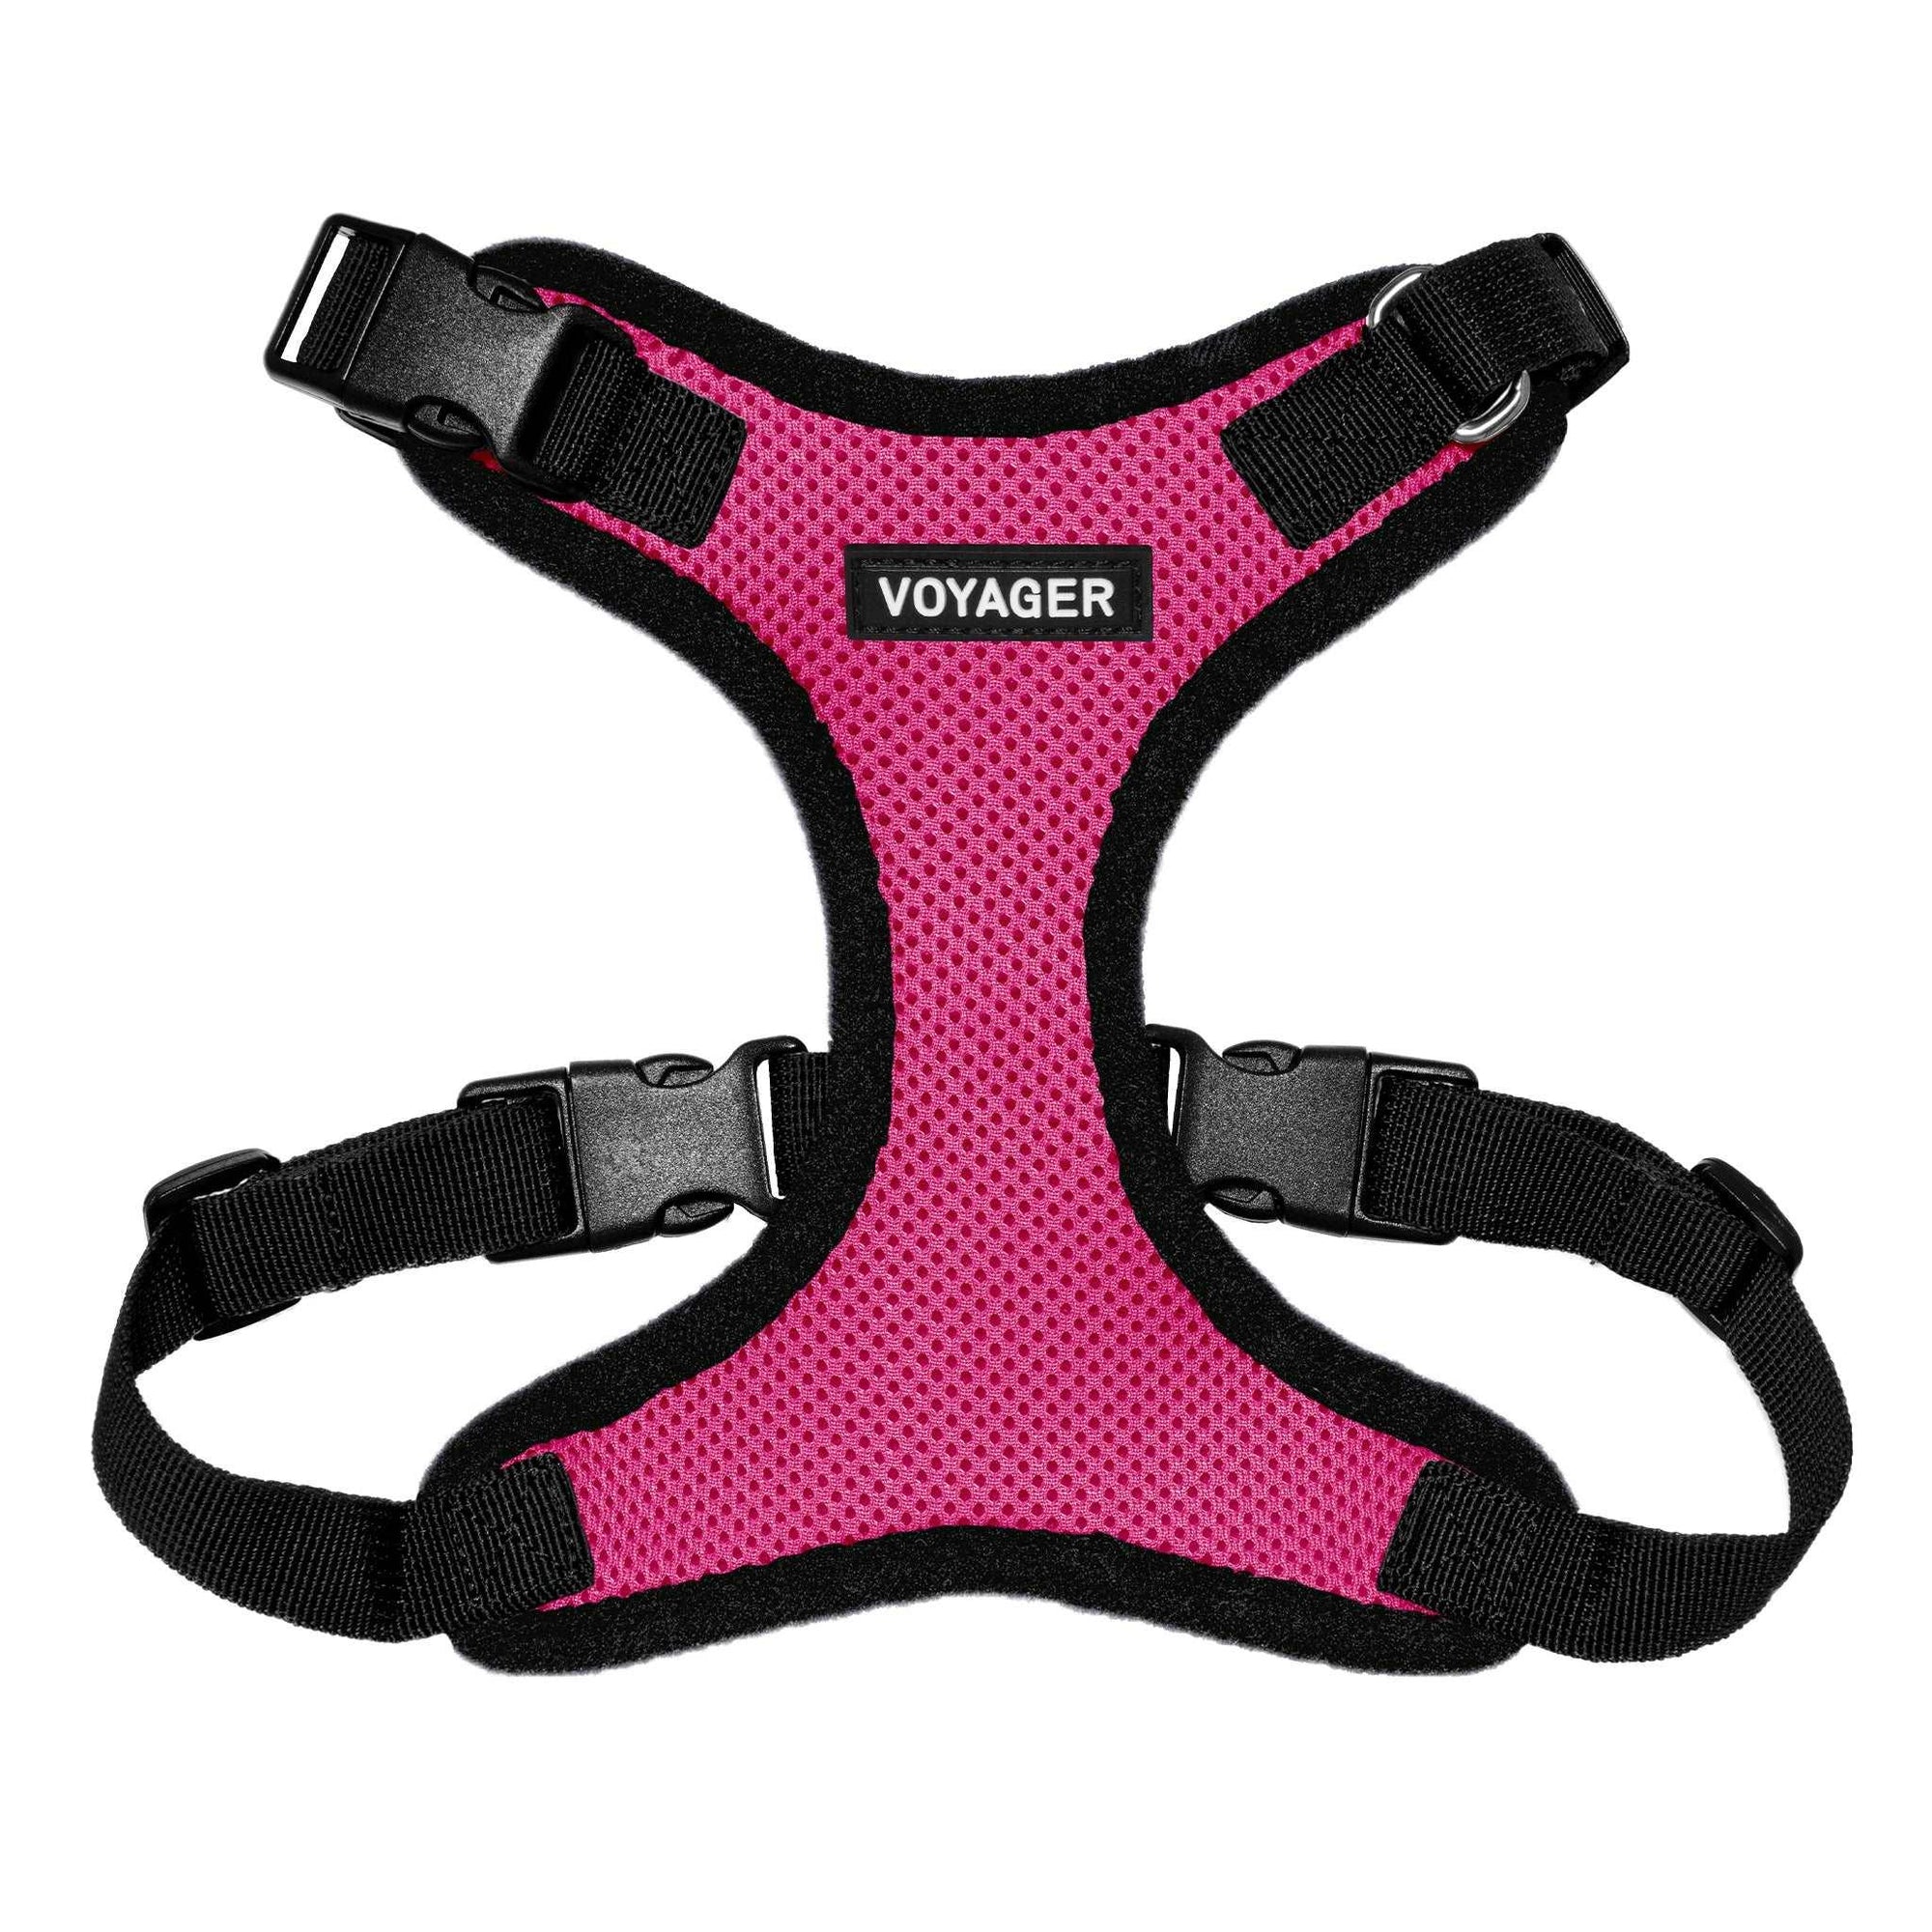 VOYAGER Step-In Lock Dog Harness in Fuchsia with Black Trim and Webbing - Front